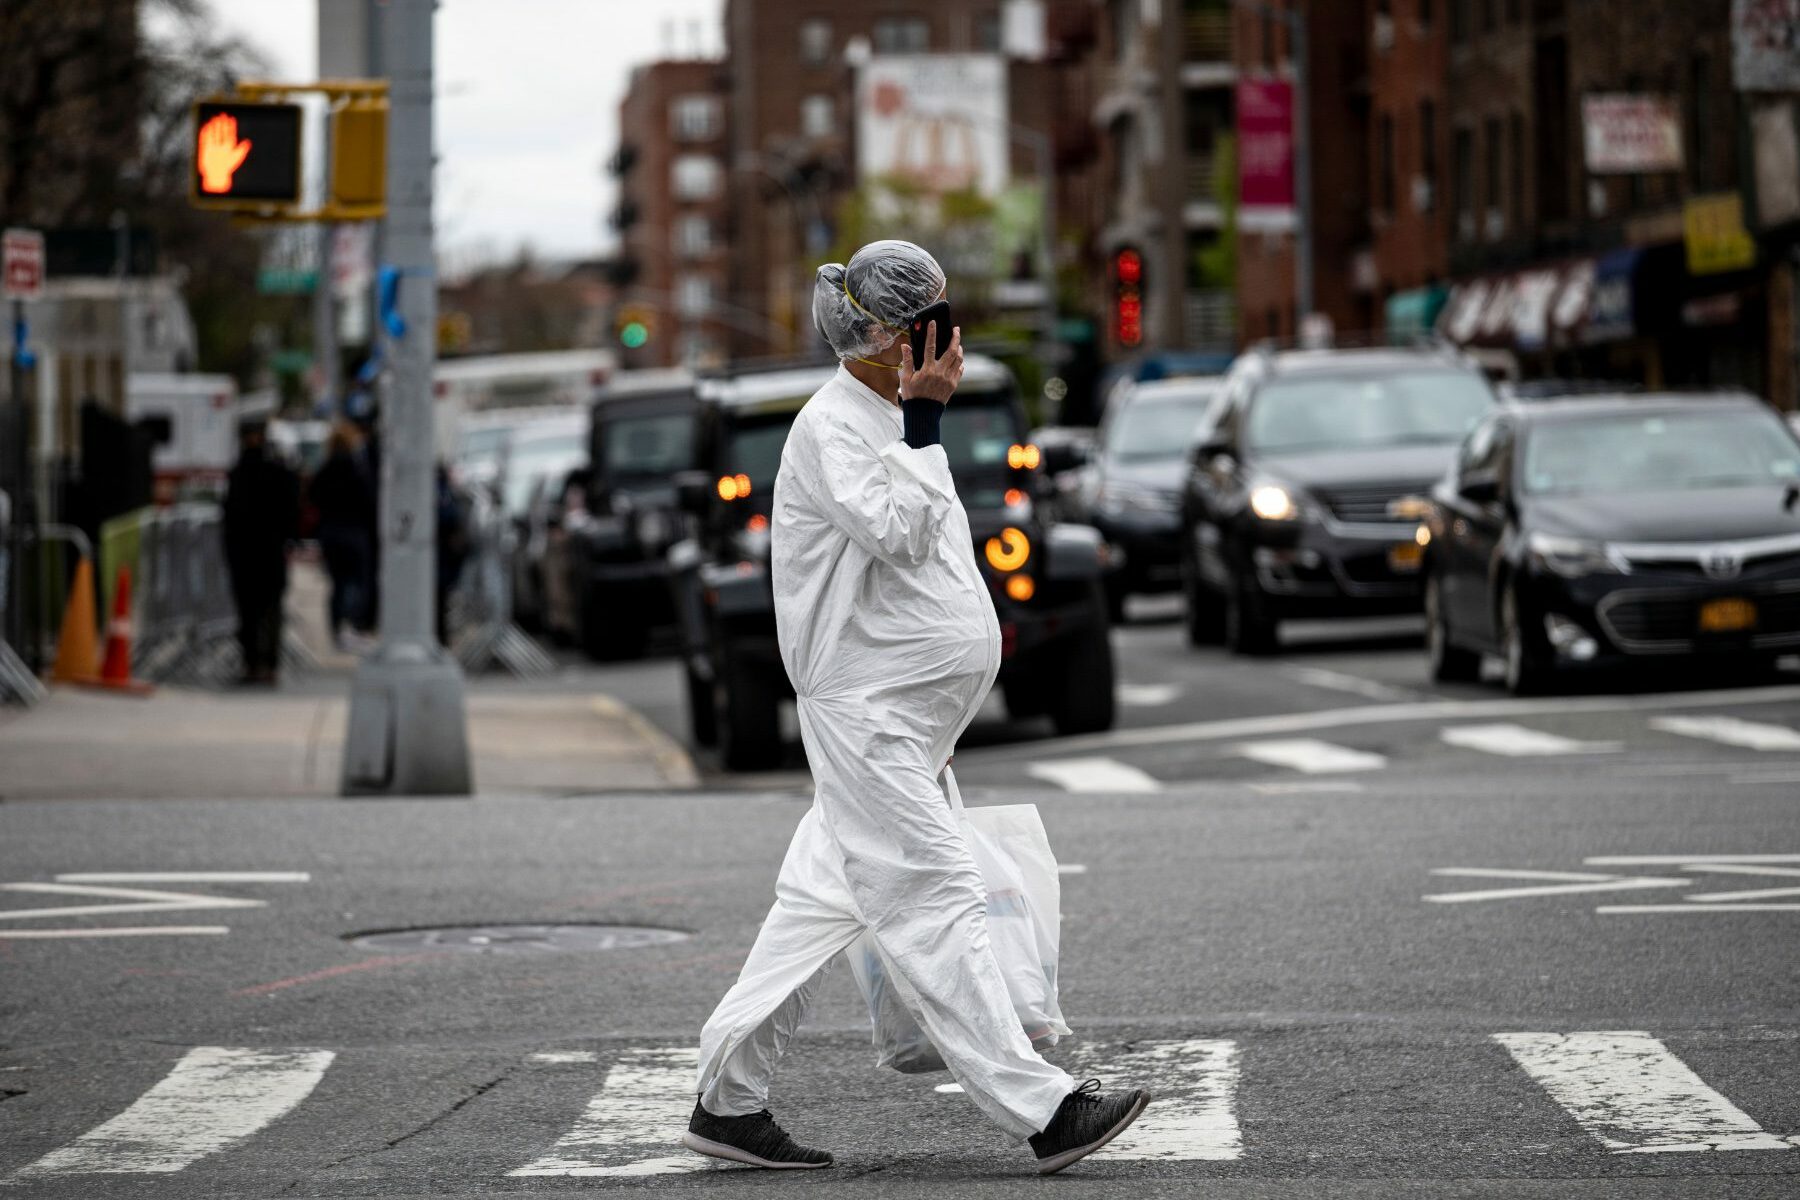 A pregnant woman wearing a hazmat suit and a mask walks in the streets.